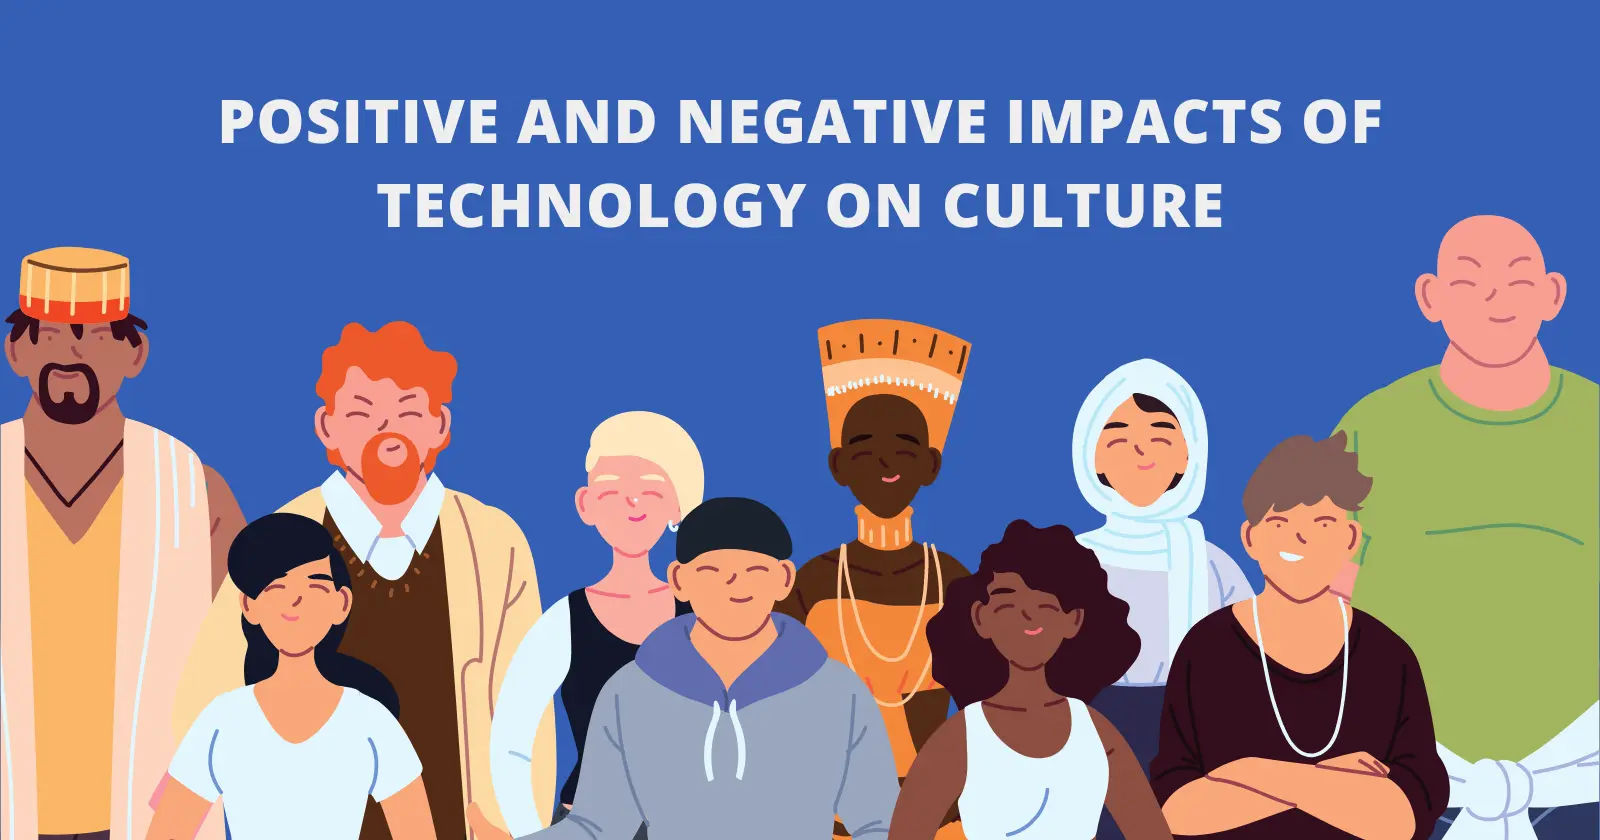 A group of diverse people representing different cultures and ethnicities, with the text "Positive and Negative Impacts of Technology on Culture" above them.